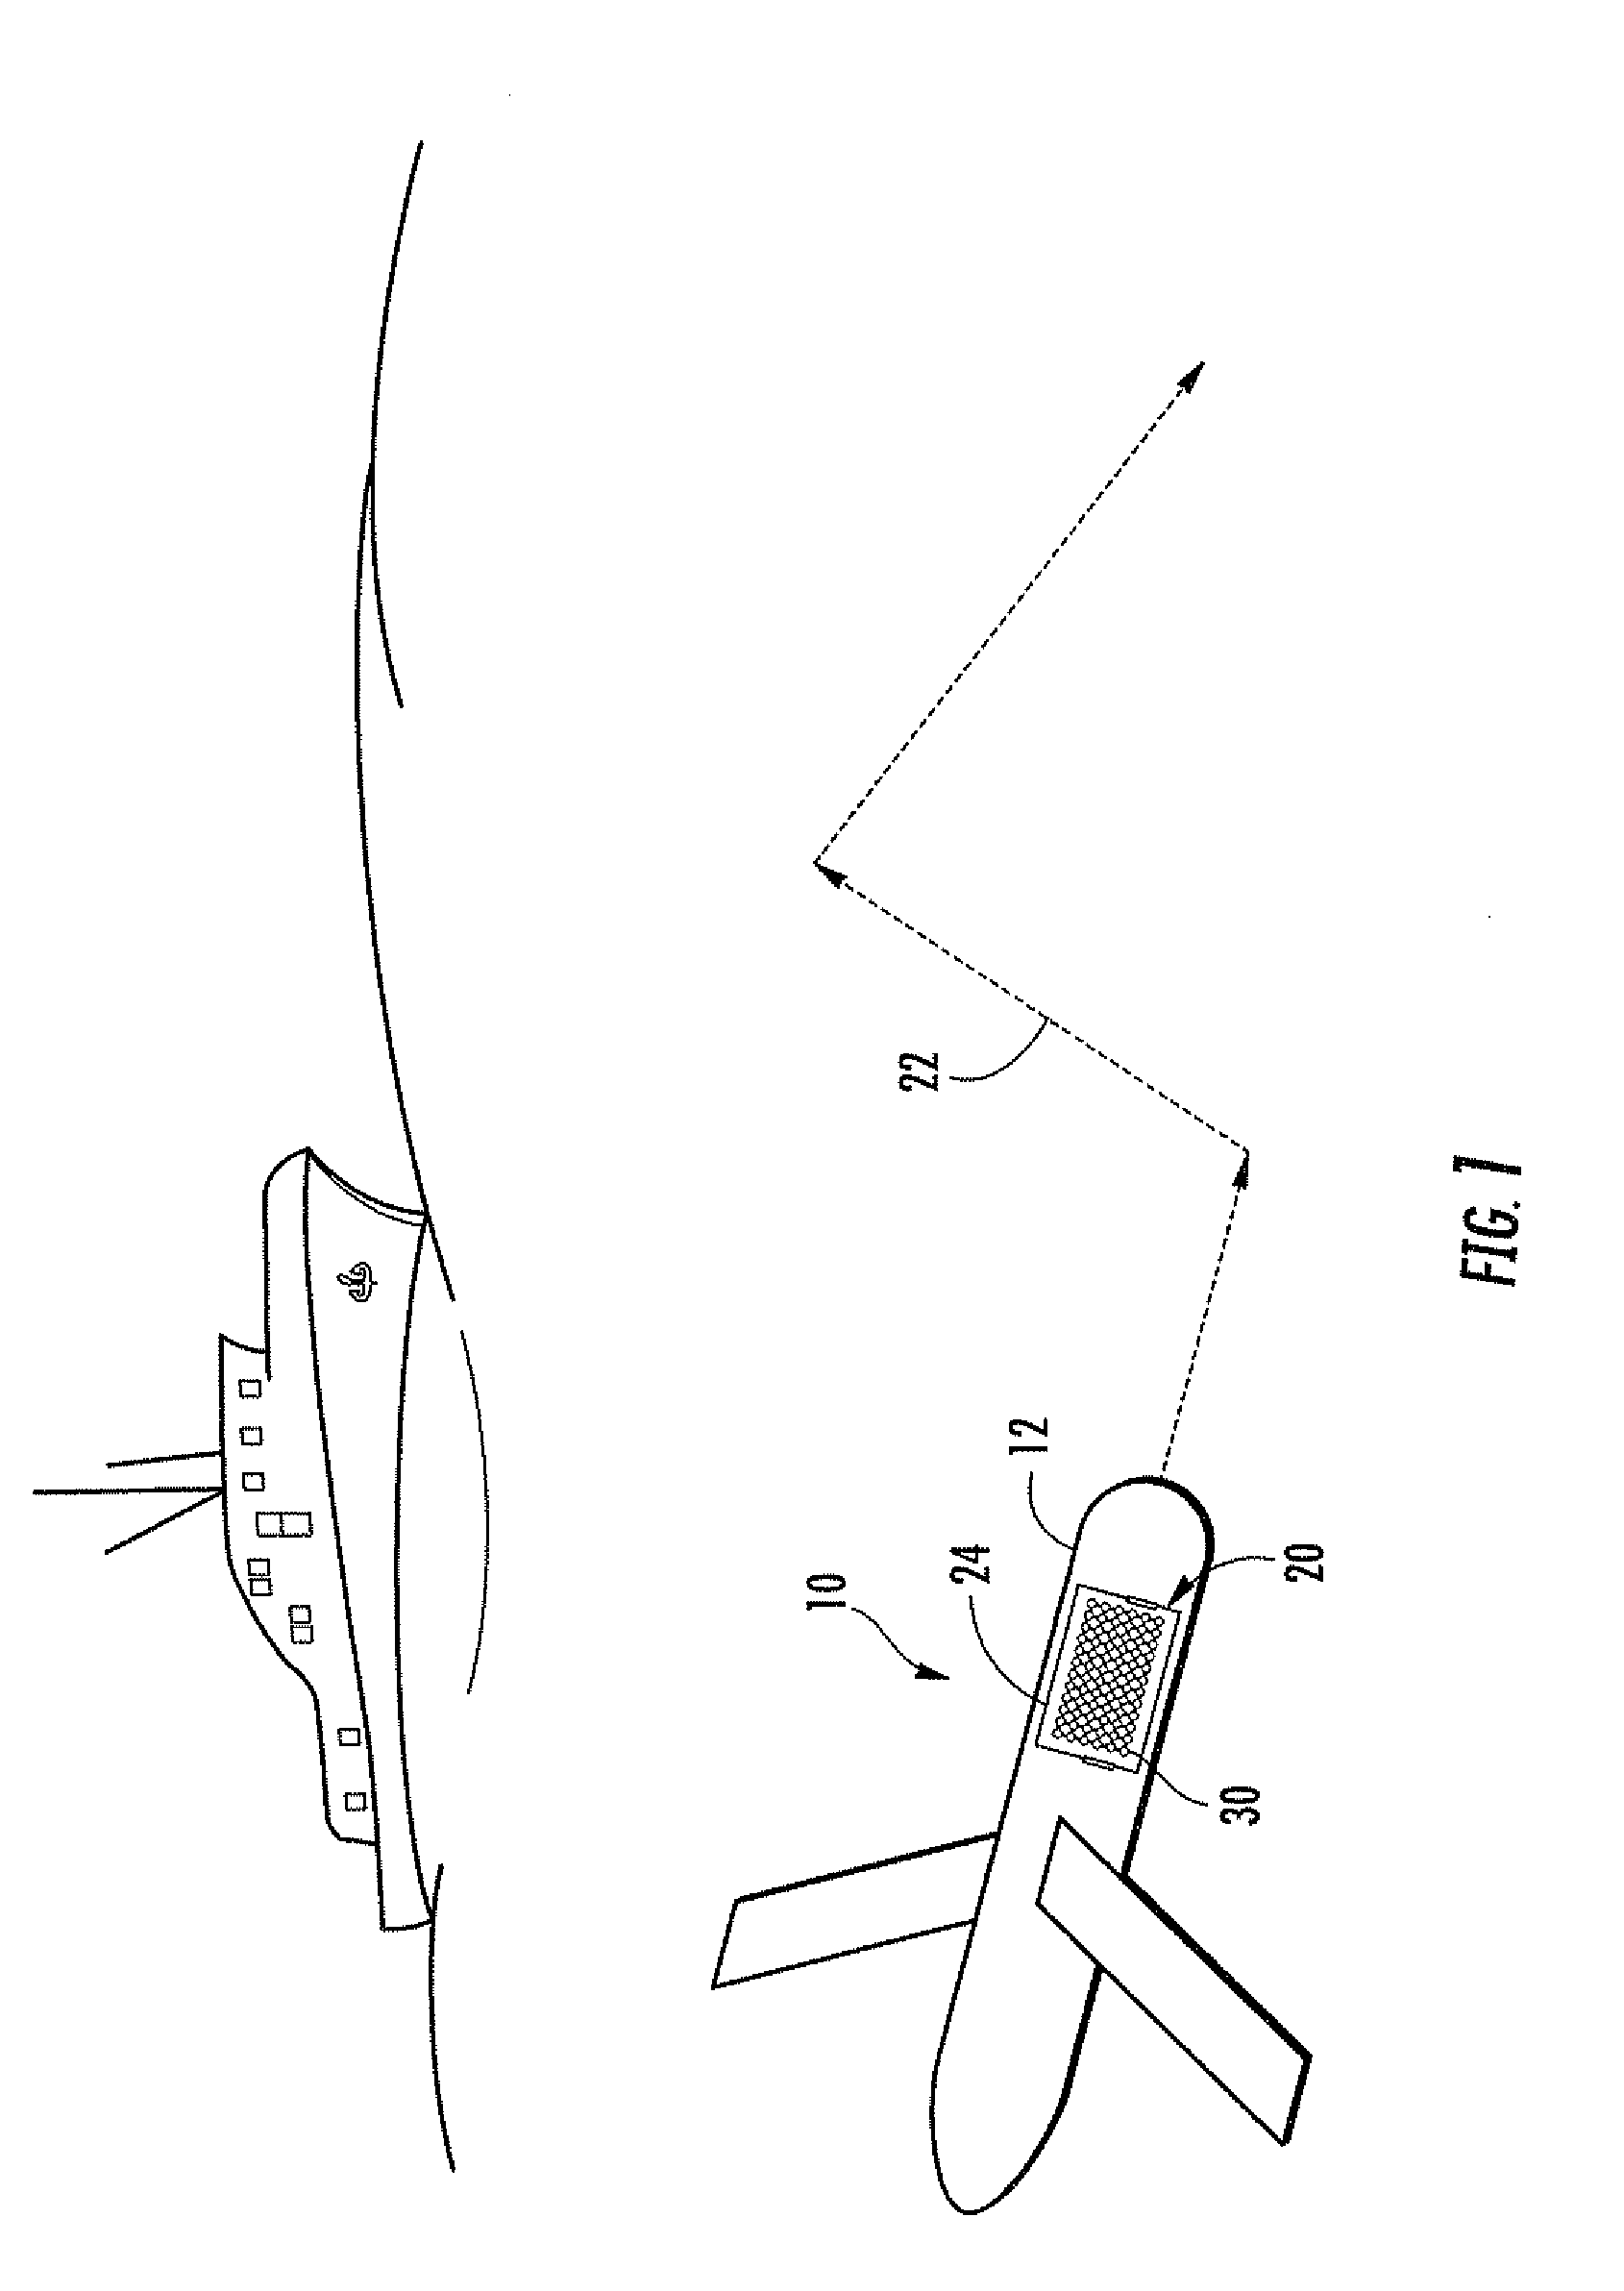 Buoyancy system for an underwater device and associated methods for operating the same